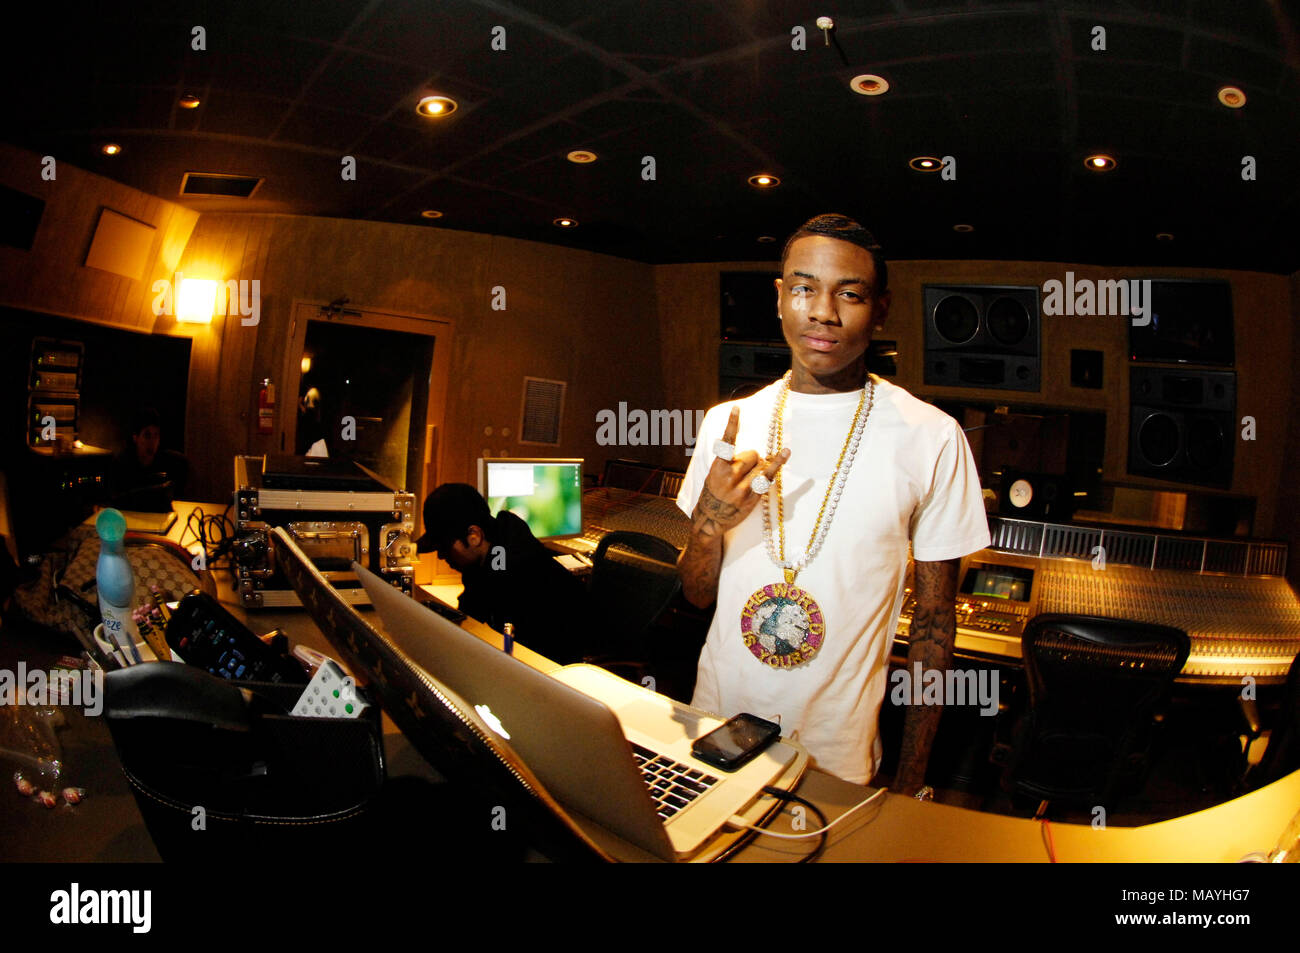 EXCLUSIVE Rapper Soulja Boy Tell Em at the Record Plant in Los Angeles  Stock Photo - Alamy